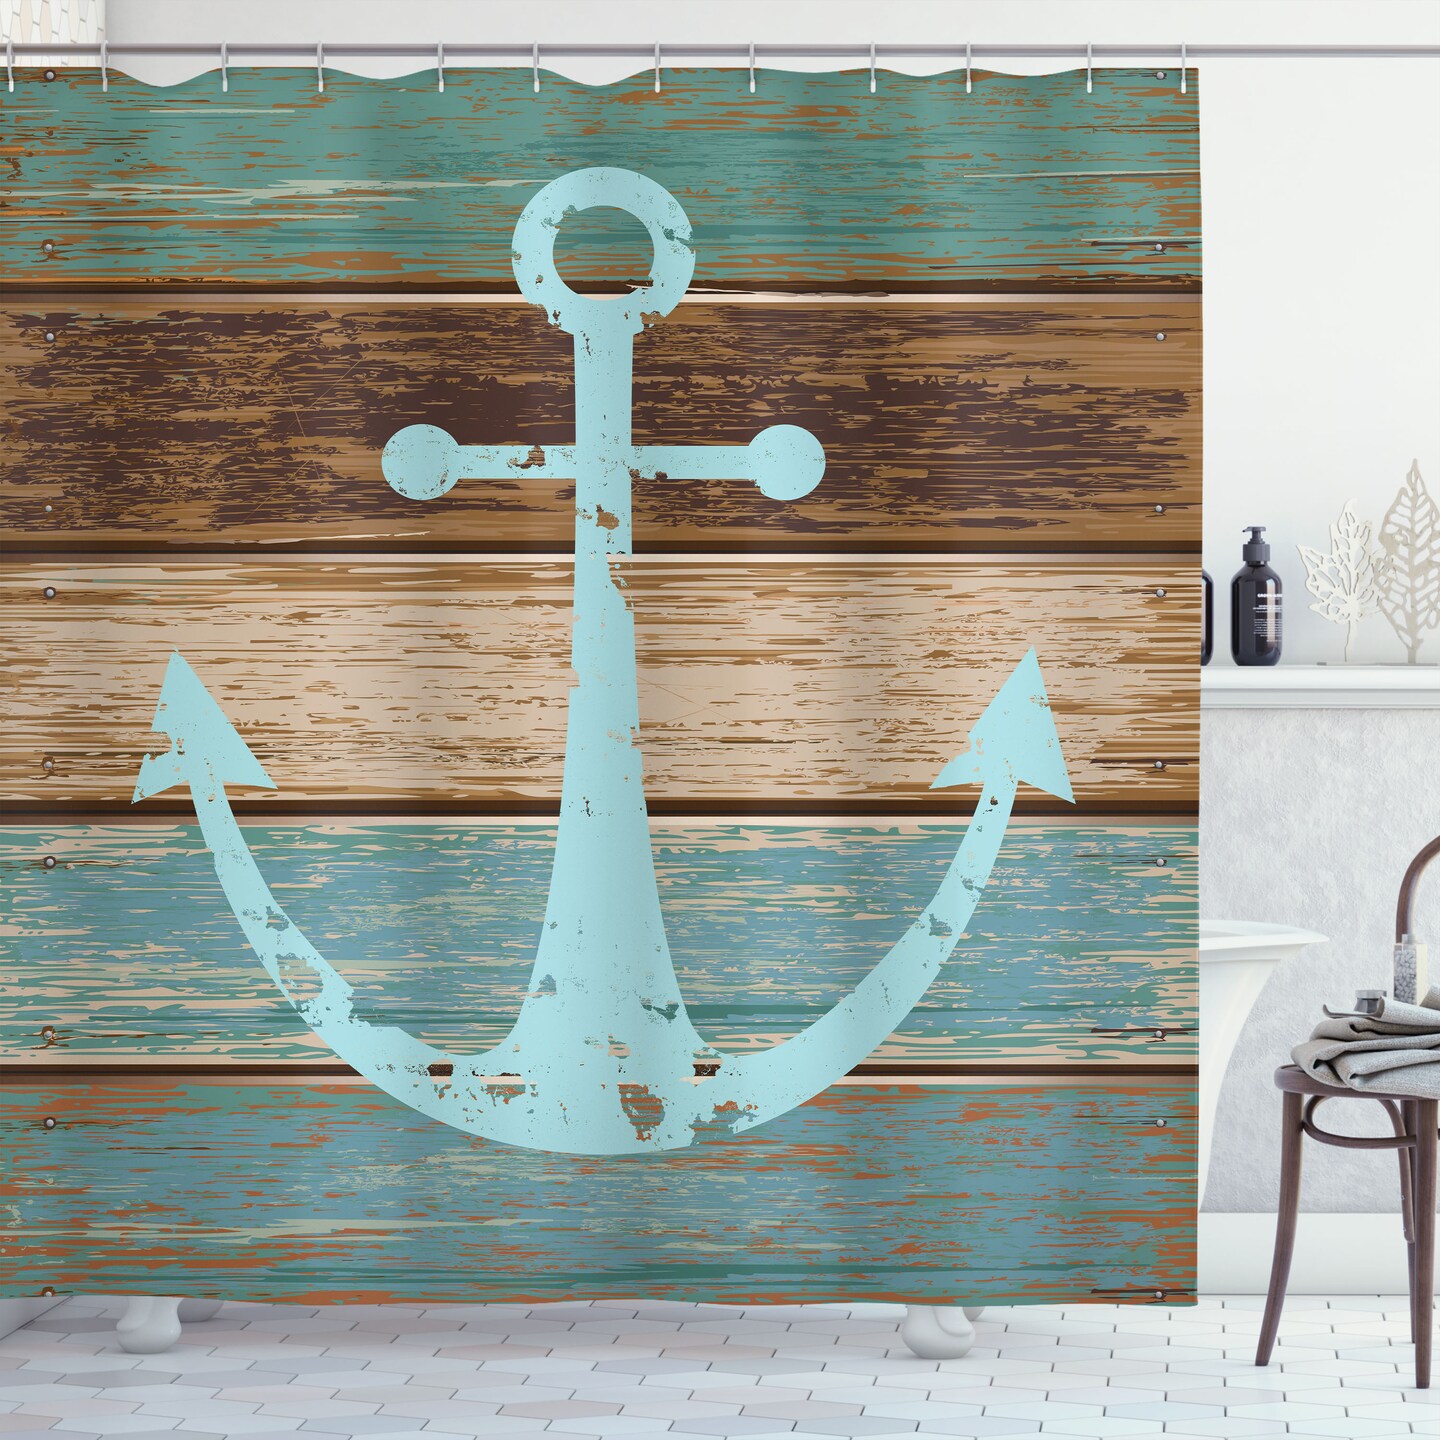 Ambesonne Anchor Shower Curtain, Timeworn Marine on Weathered Wooden Planks Rustic  Nautical Theme, Cloth Fabric Bathroom Decor Set with Hooks, 69 W x 70 L,  Teal Brown